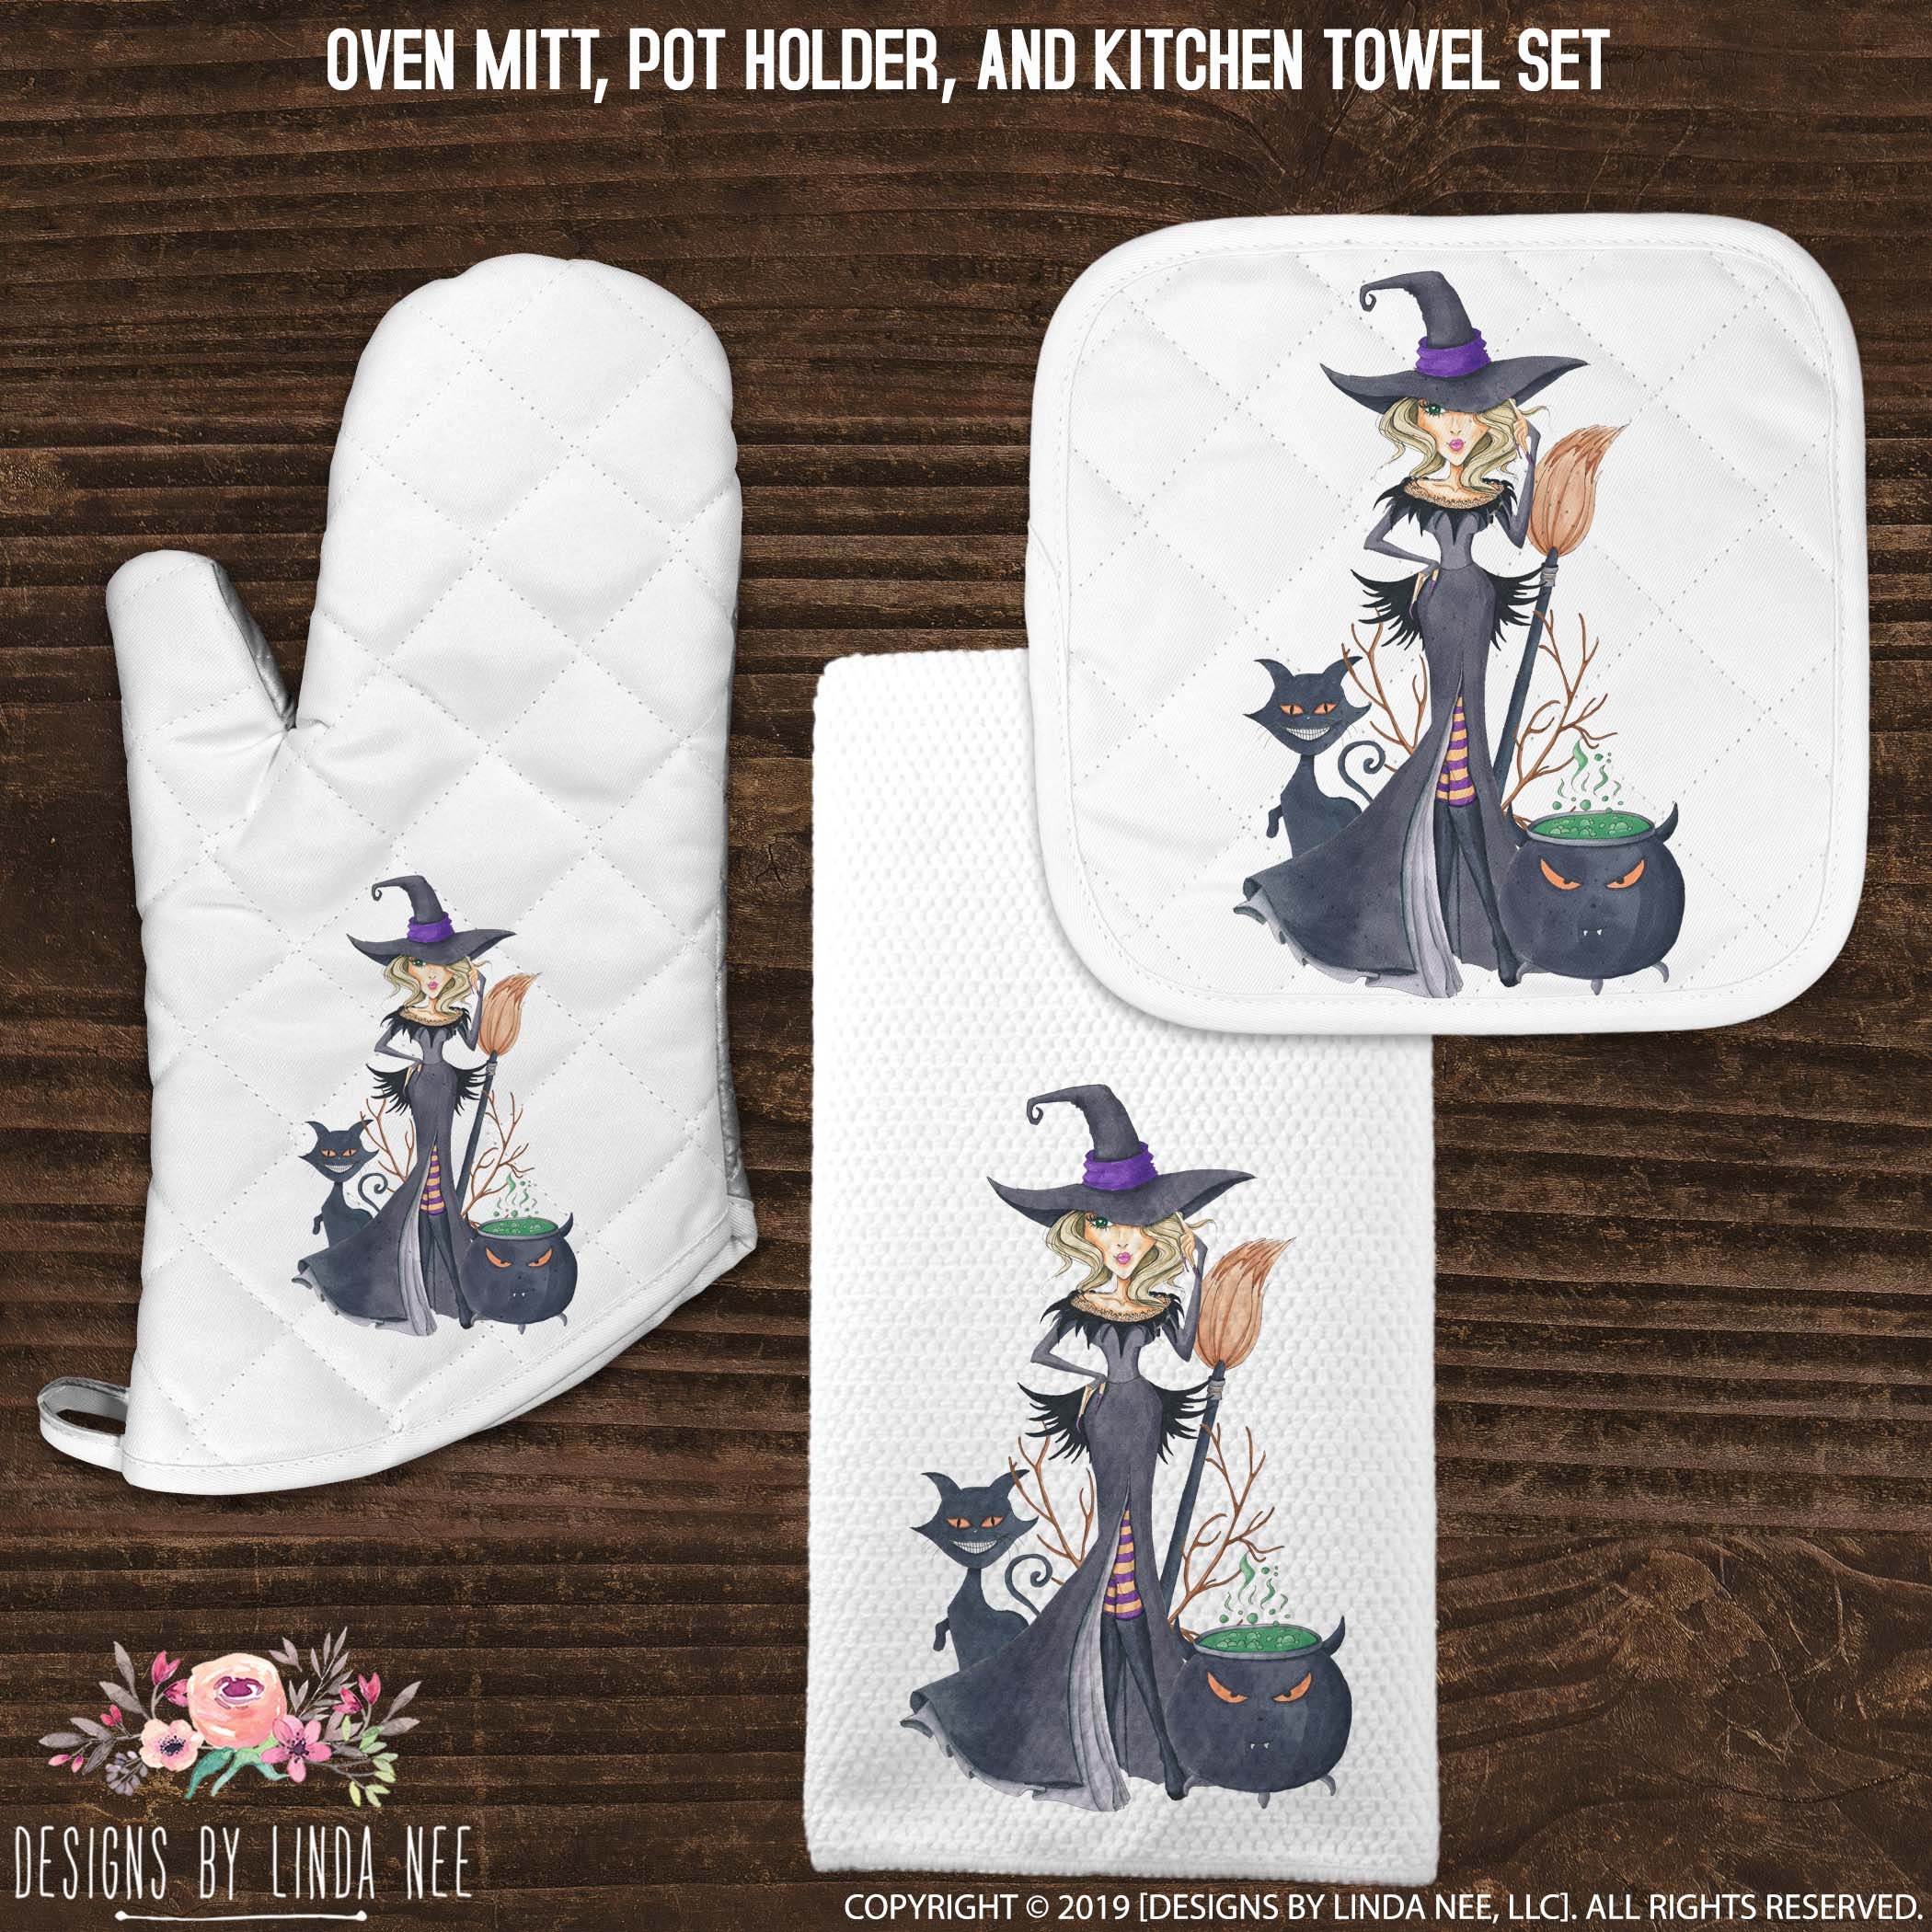 Witches Brew Iridescent Kitchen Hand Towels Halloween Gothic Spooky 2 pack